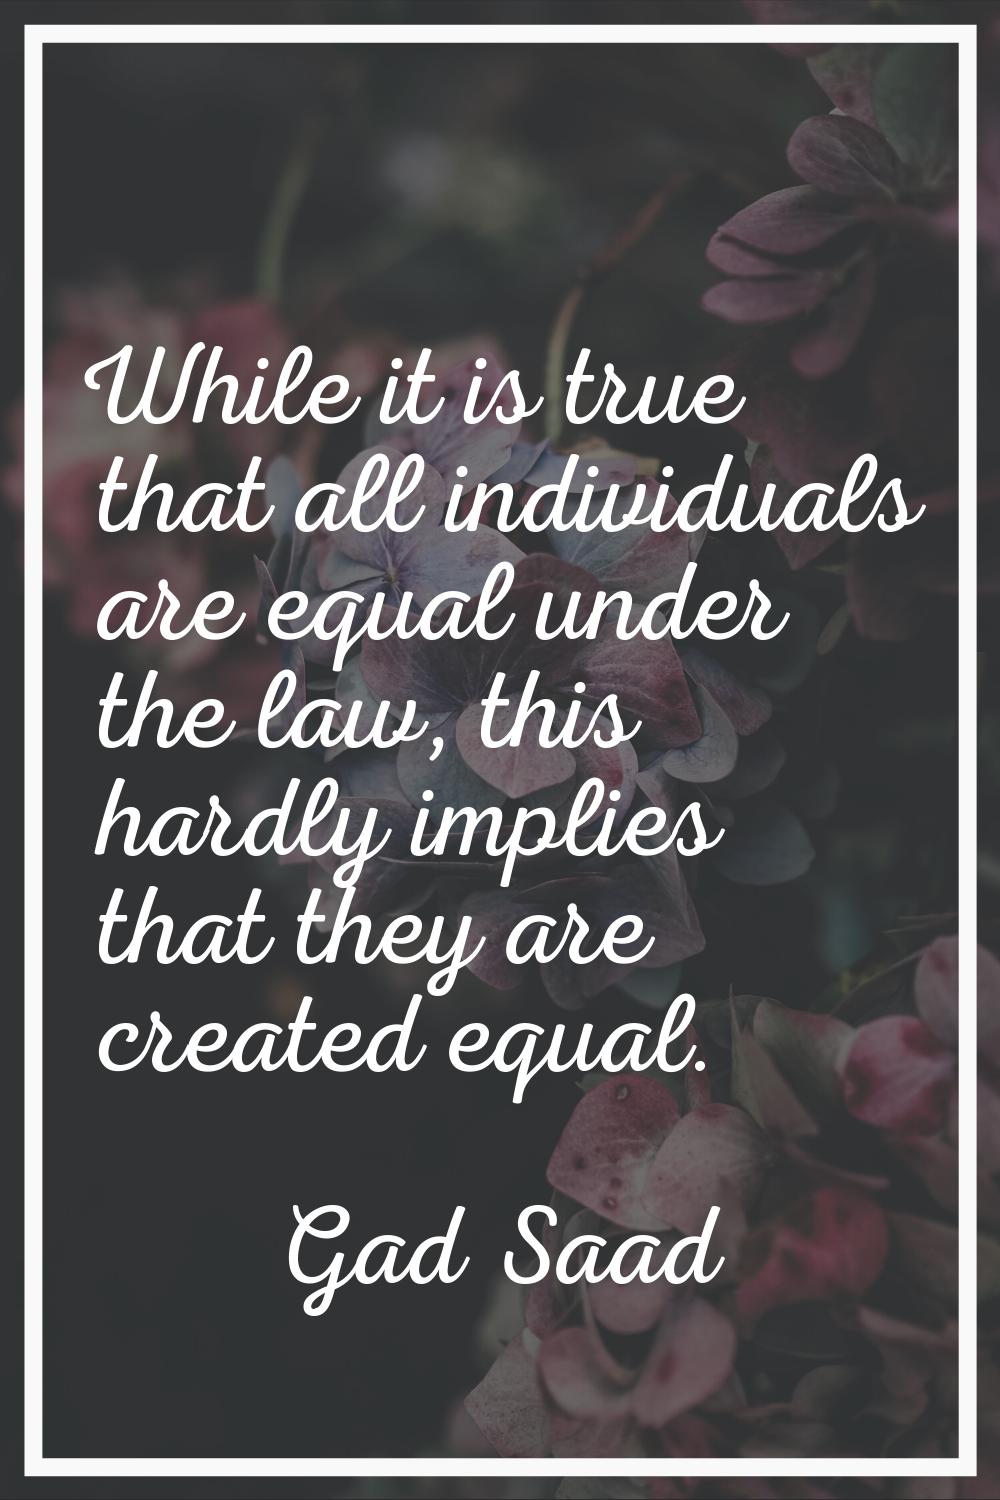 While it is true that all individuals are equal under the law, this hardly implies that they are cr